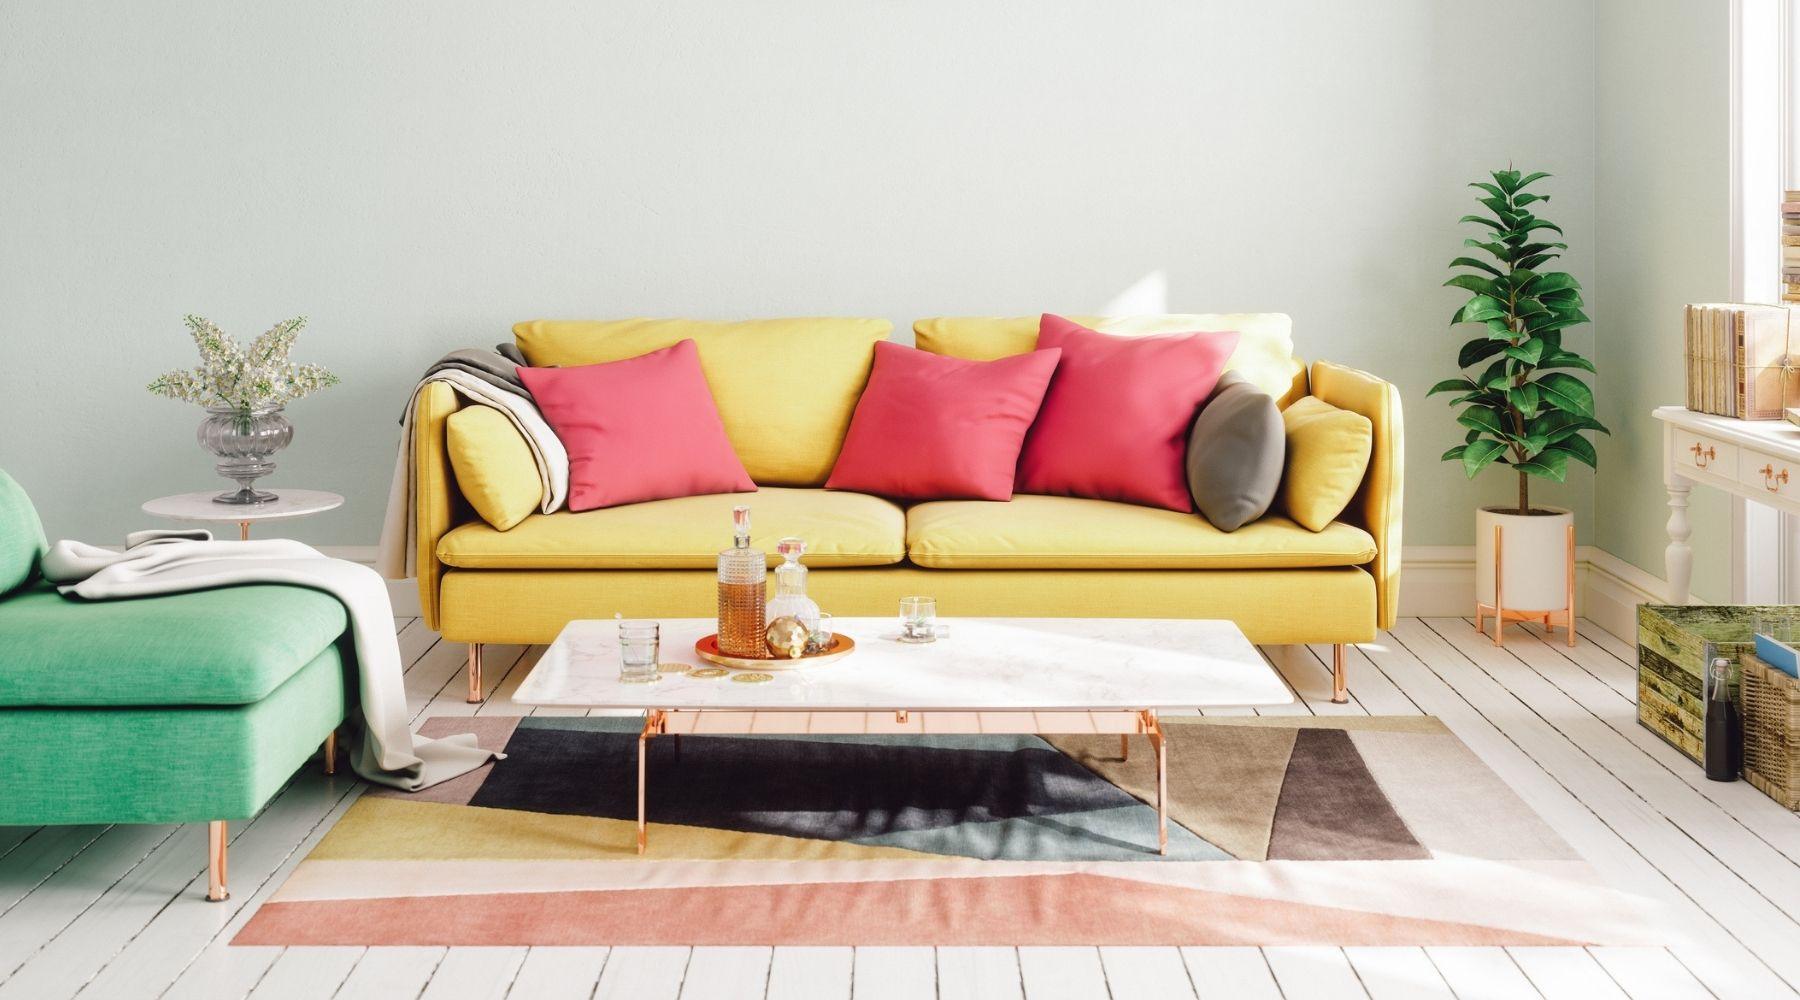 Scandinavian style living room with colorful sofa and accent pillows